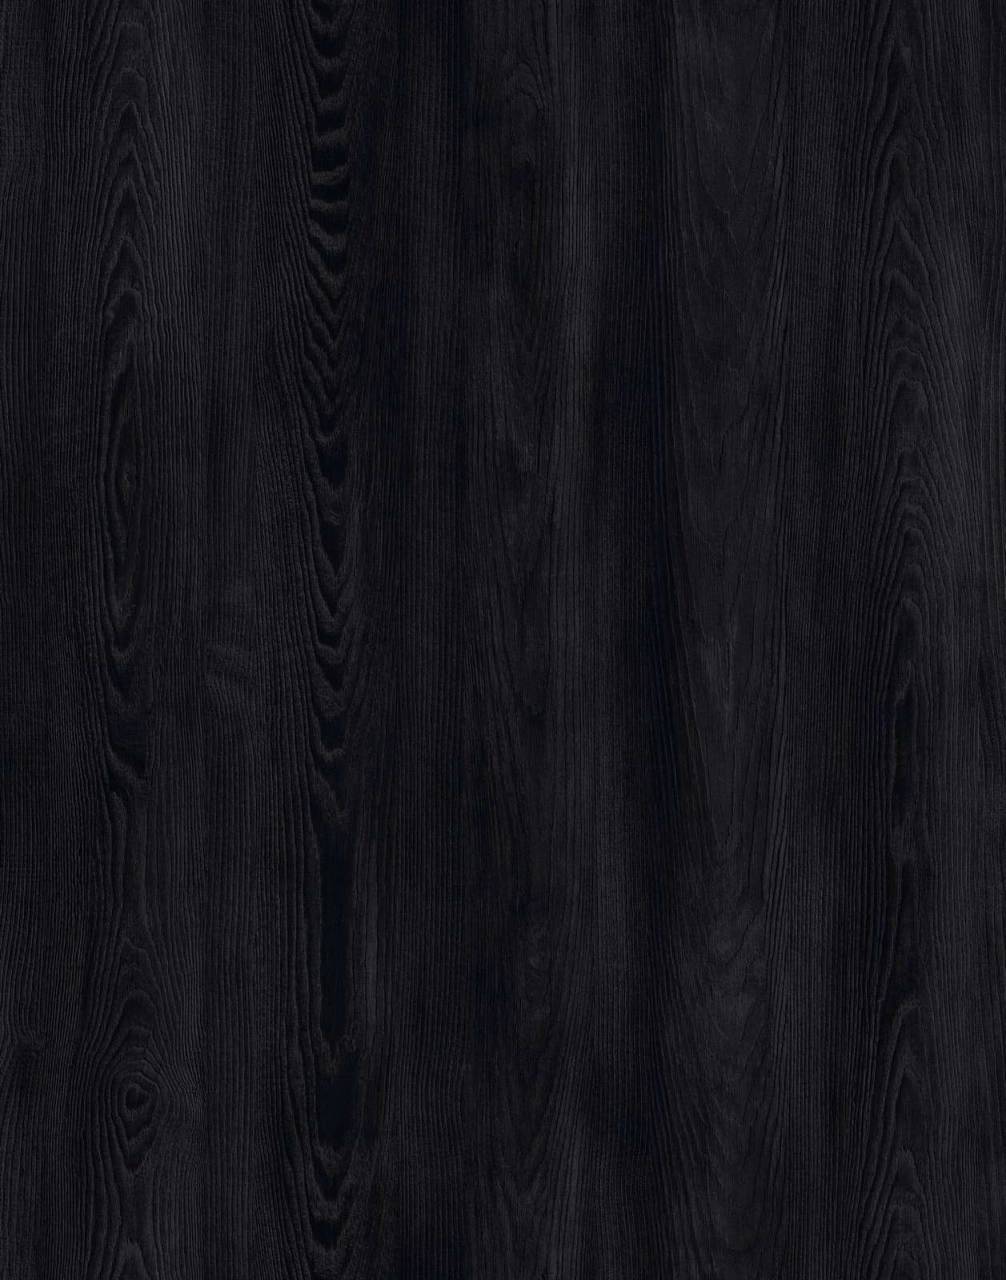 Close-up of K534 Charcoal Arvadonna Chestnut sample, featuring bold and rich Charcoal Arvadonna Chestnut color.